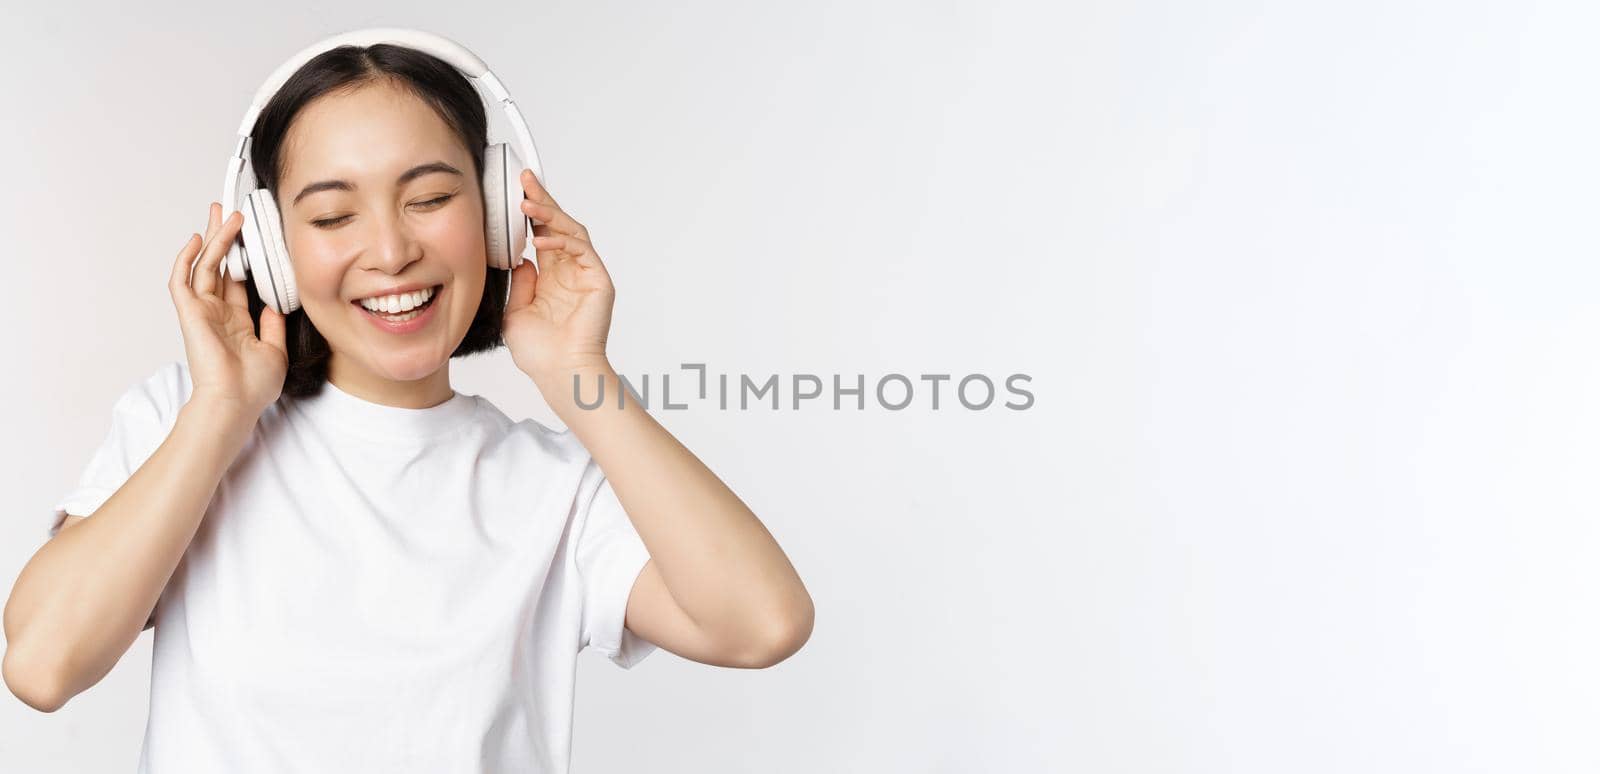 Modern asian girl dancing, listening music with headphones, smiling happy, standing in tshirt over white background.